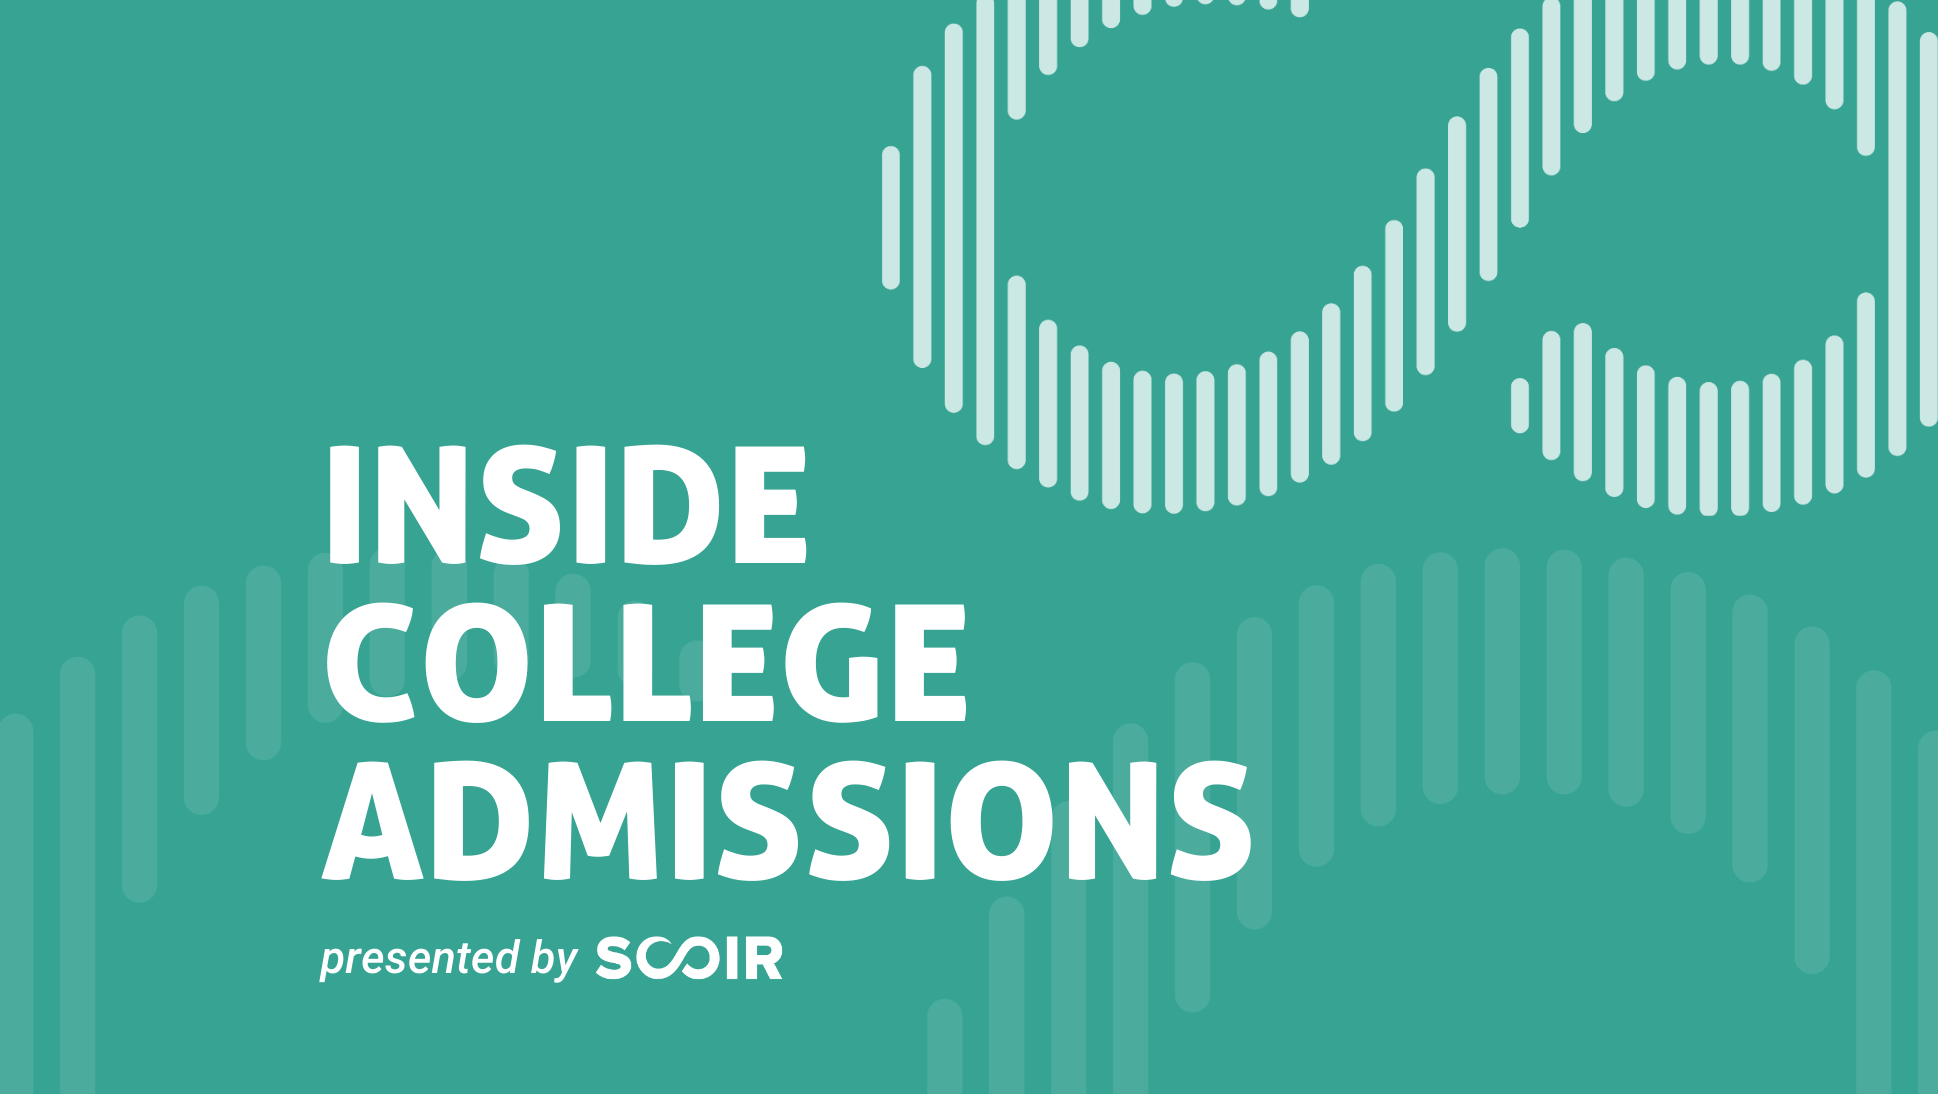 Introducing: Inside College Admissions - A Podcast Presented by Scoir